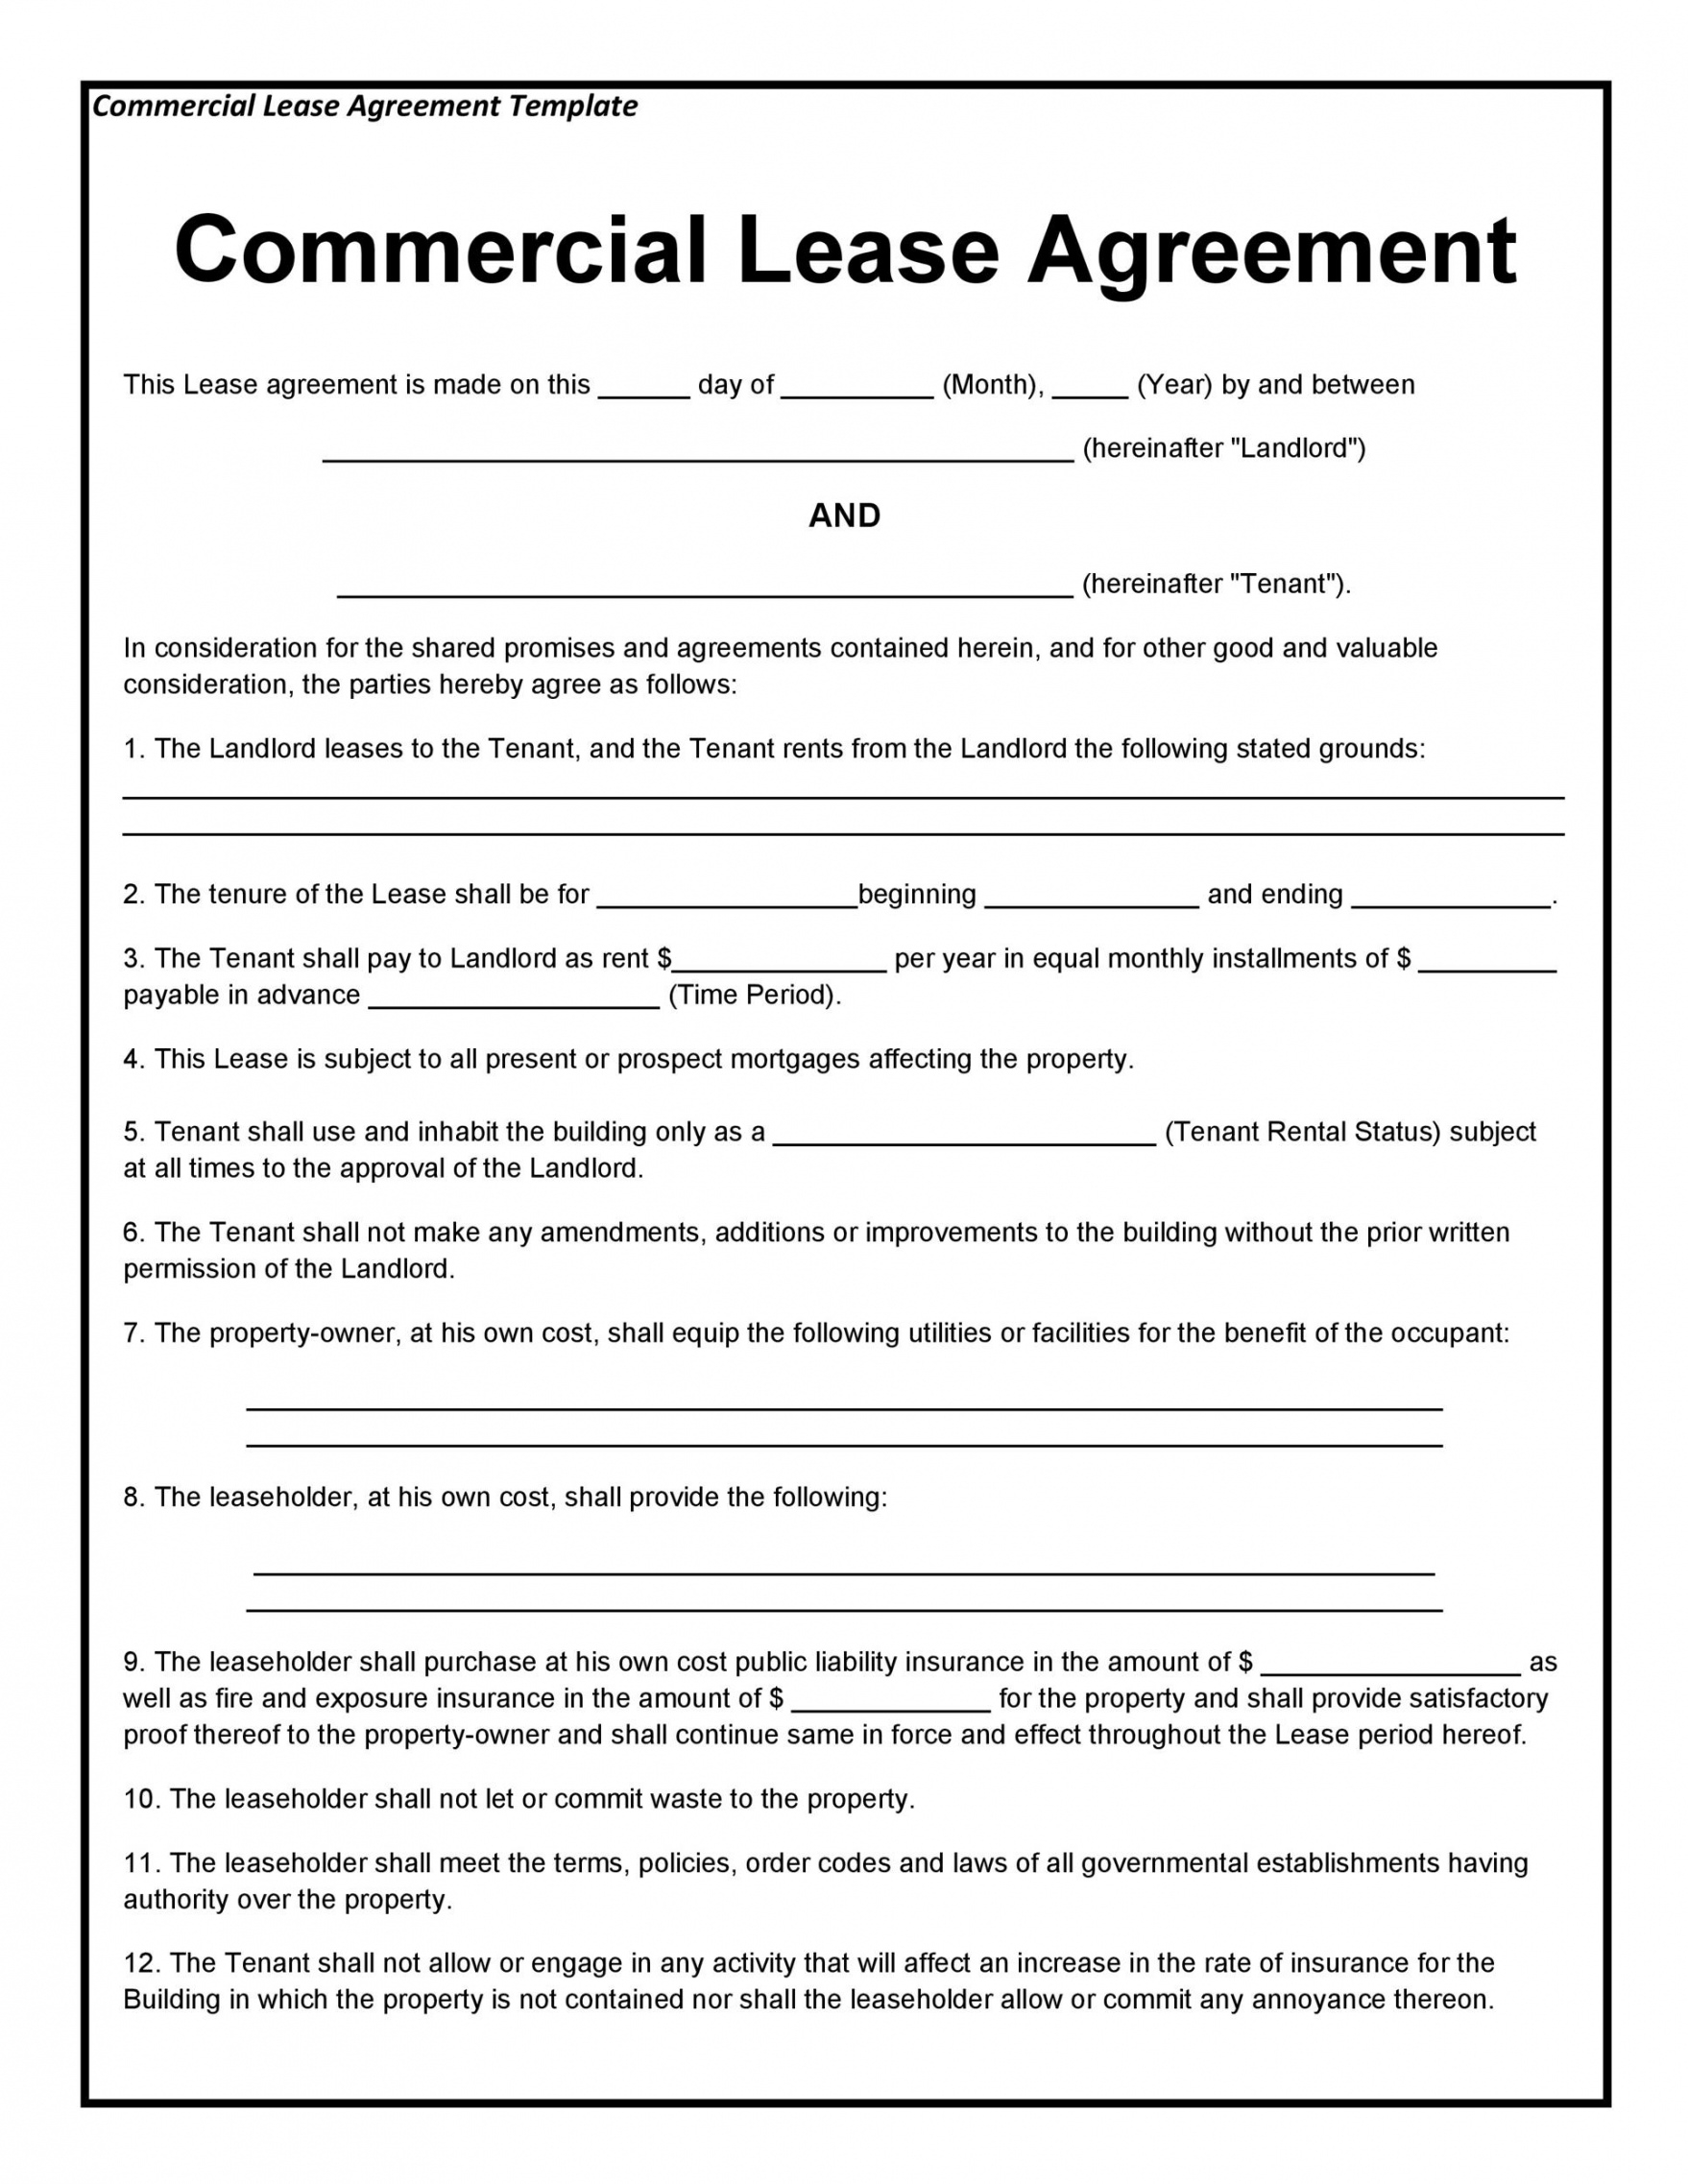 free 26 free commercial lease agreement templates ᐅ templatelab private rental agreement template excel